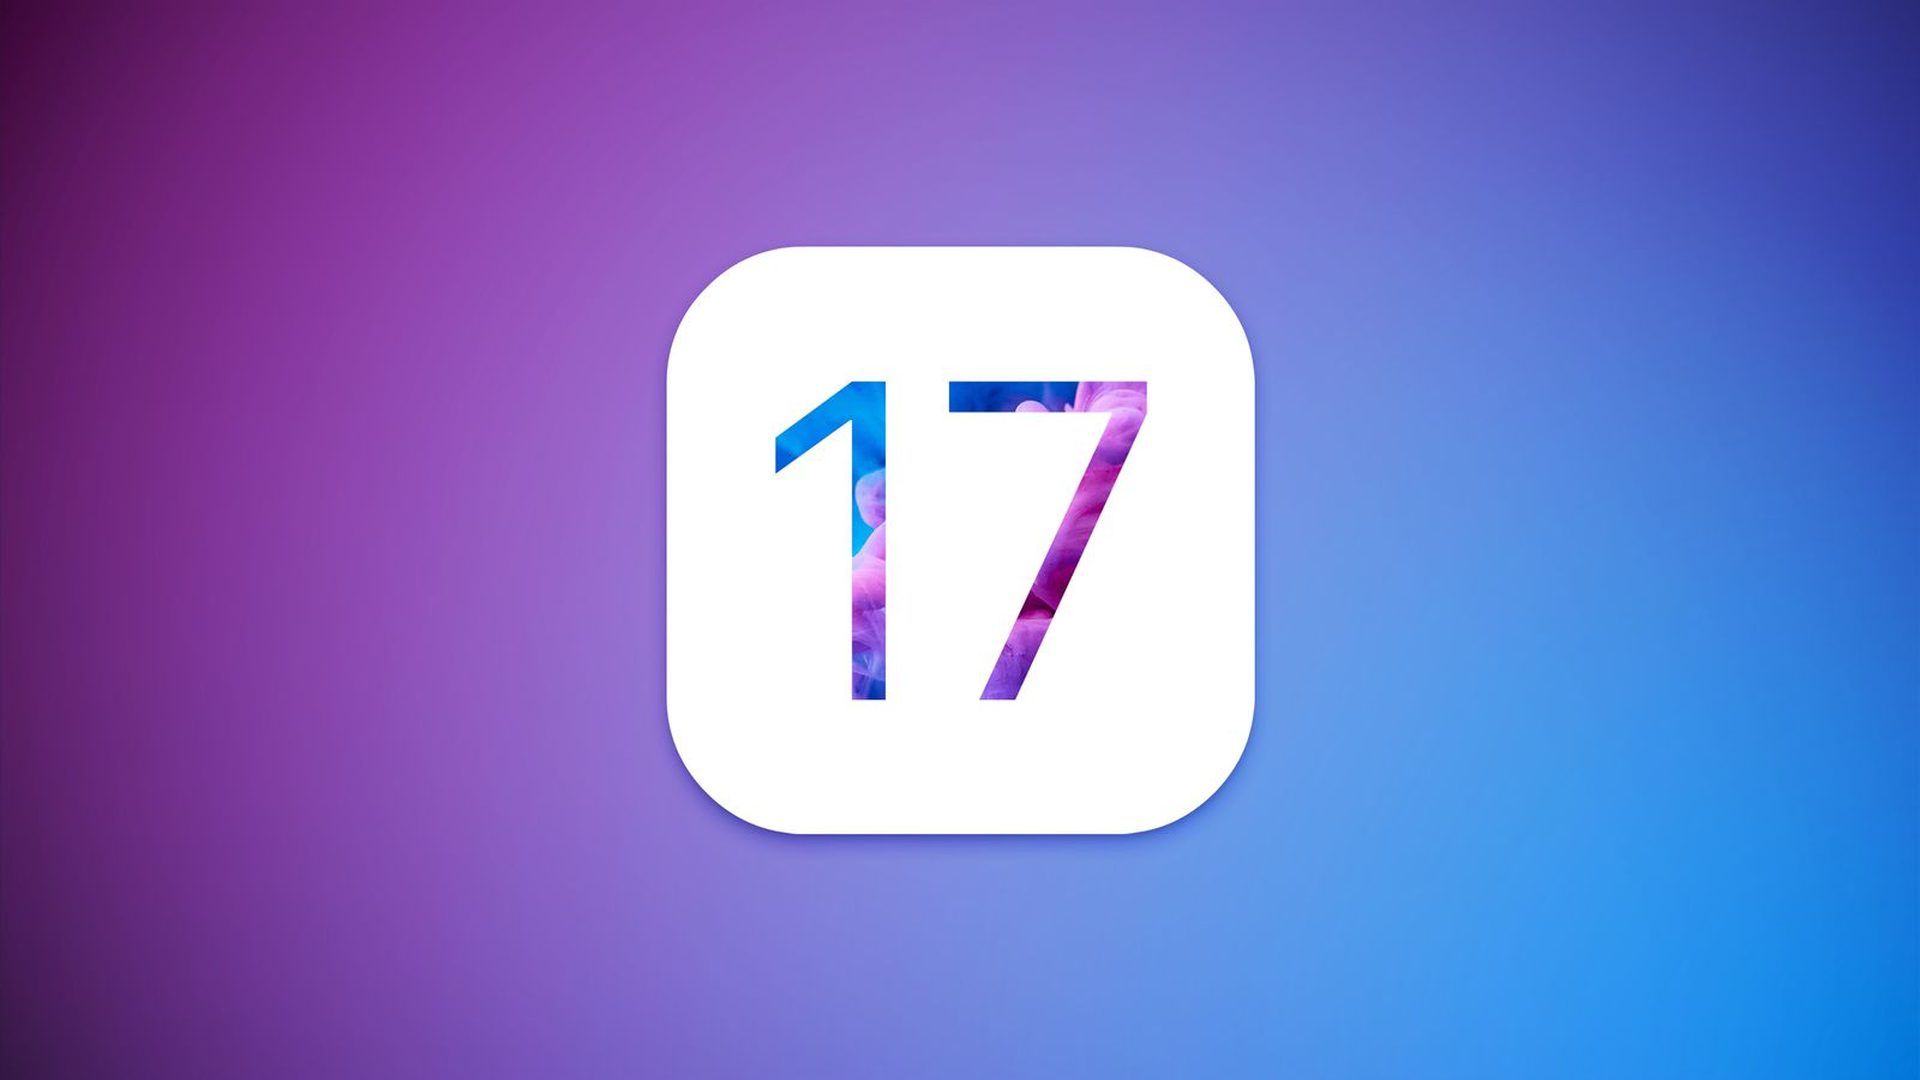 iOS 17: Supported devices, rumors, and release date